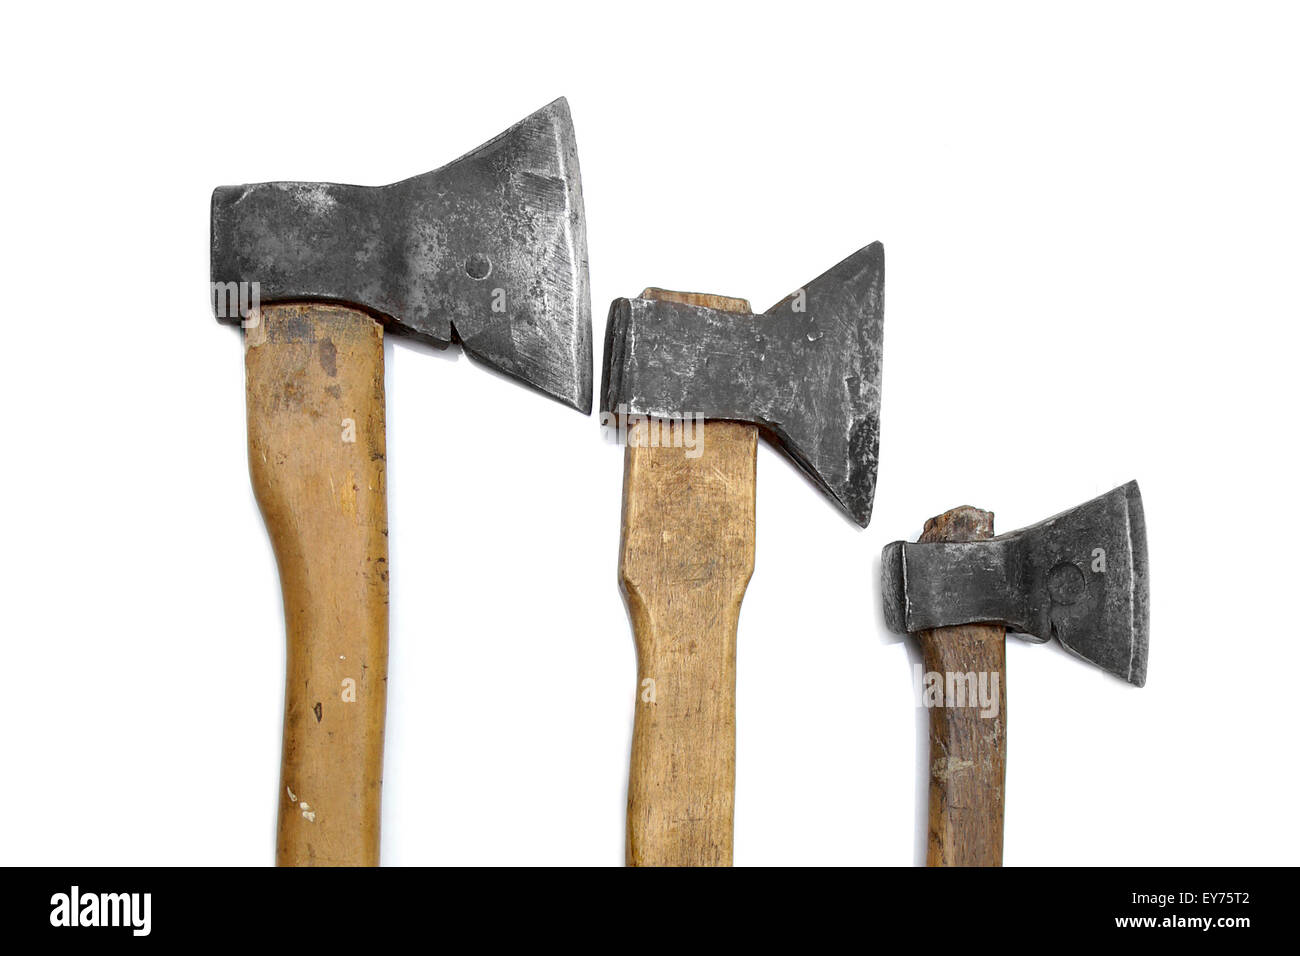 axes big large medium small wooden handle working vintage isolated construction steel rusted Stock Photo